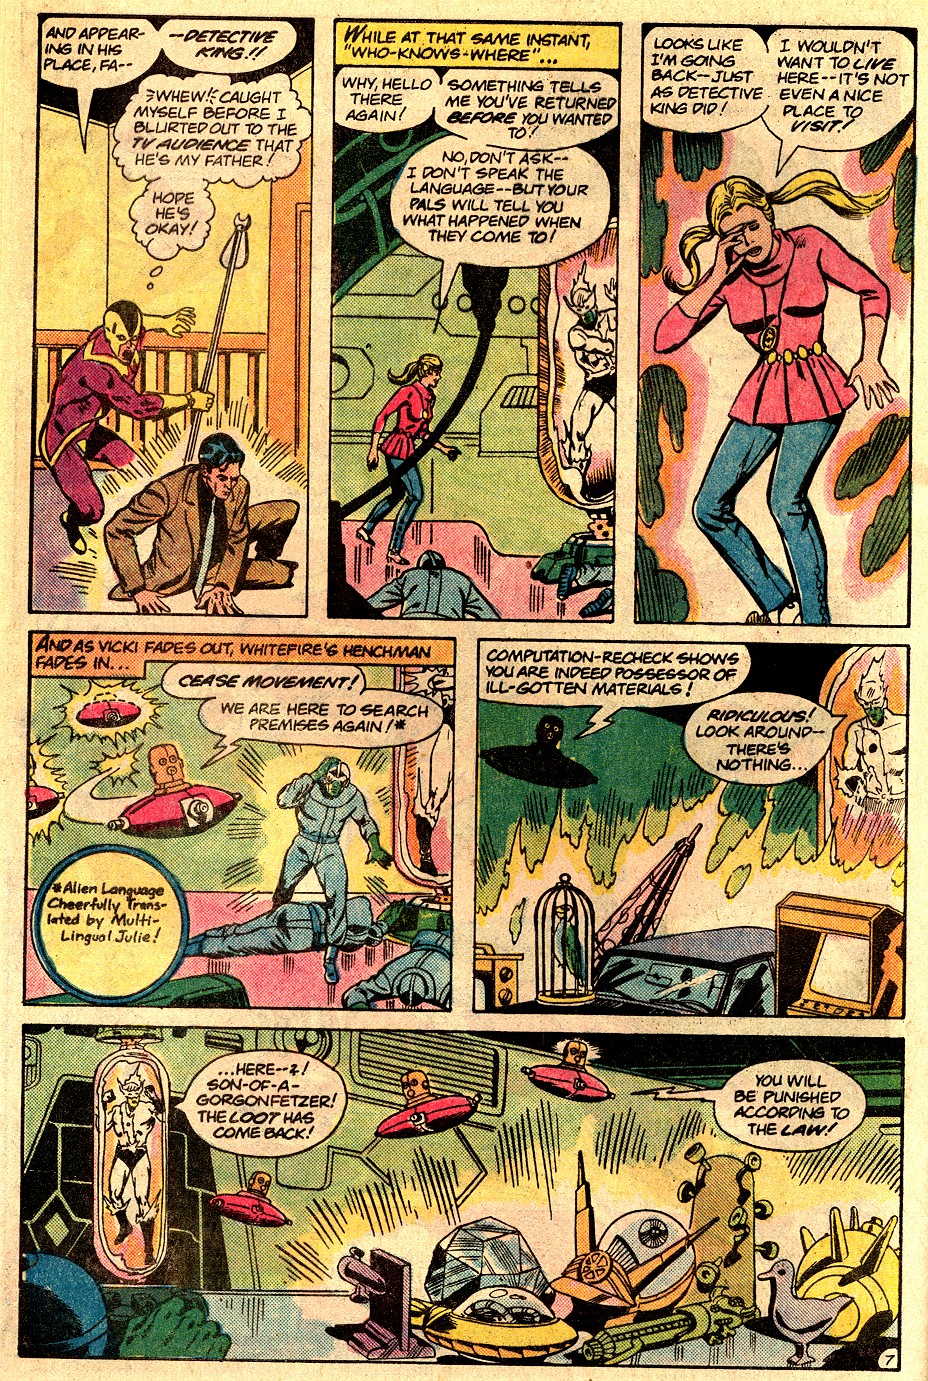 The New Adventures of Superboy 32 Page 31